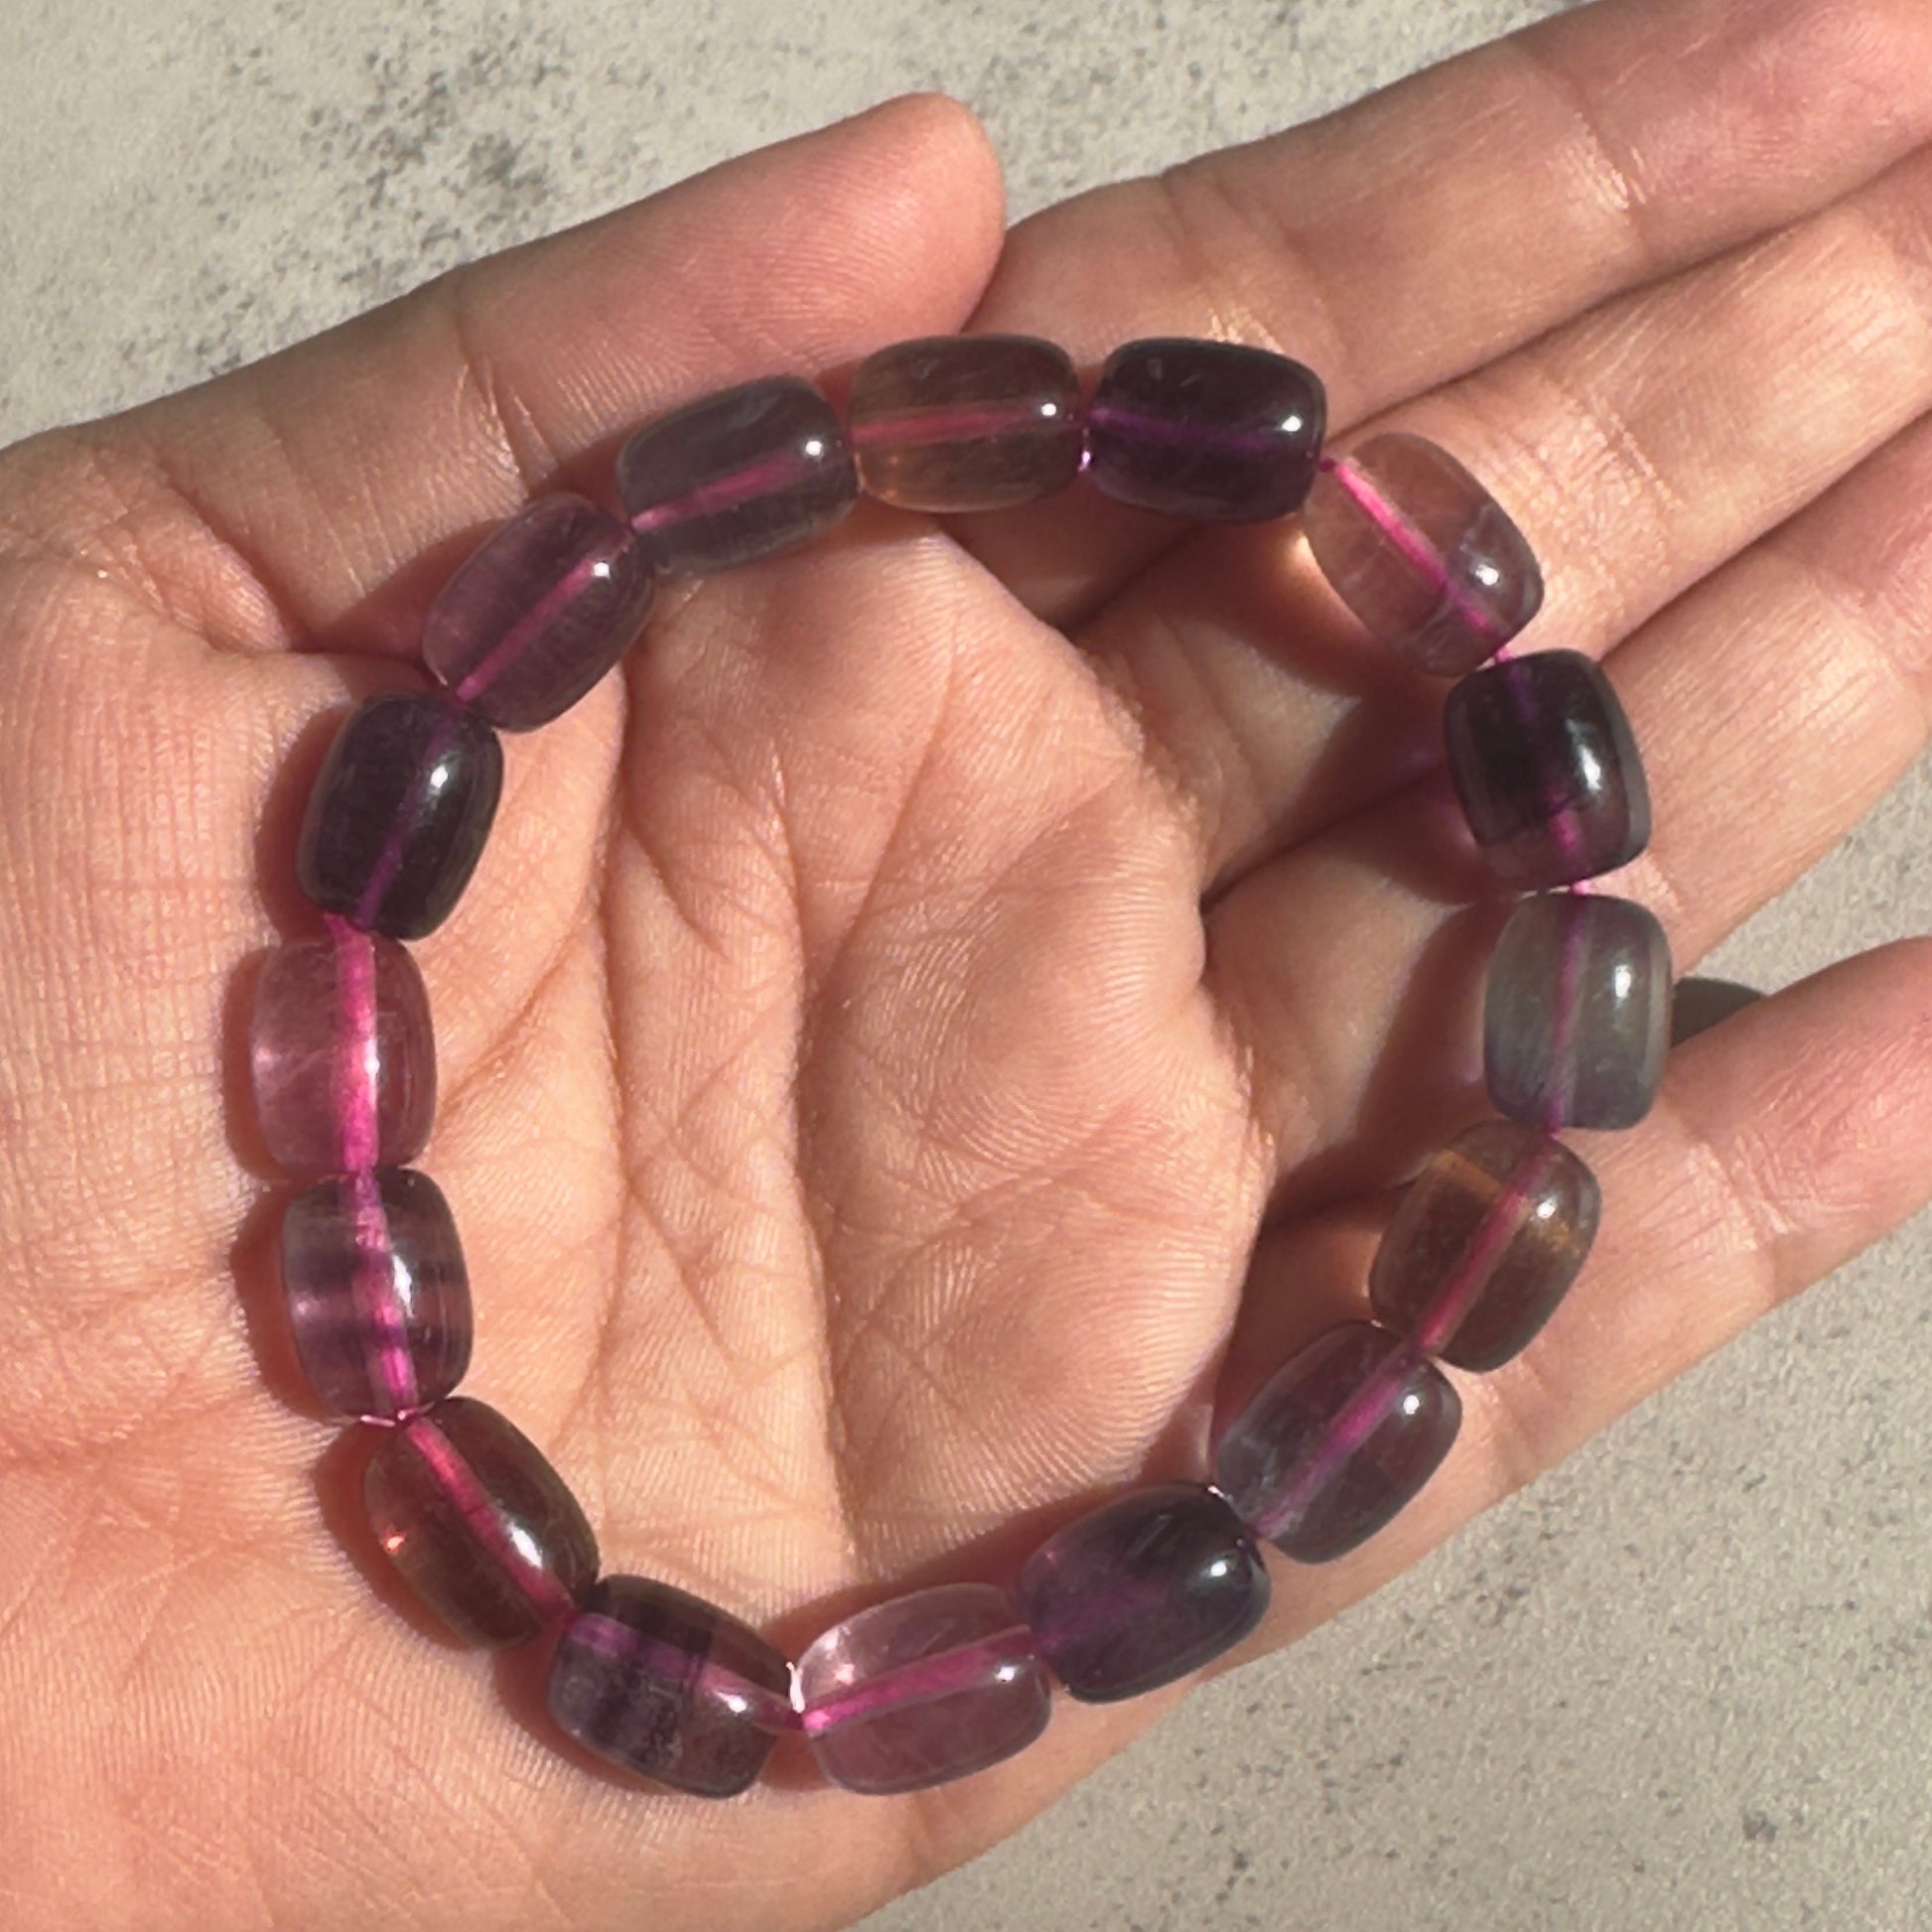 Barrel Fluorite Bracelet With Banding High-Quality Crystal Jewelry Beads in 8.8mm